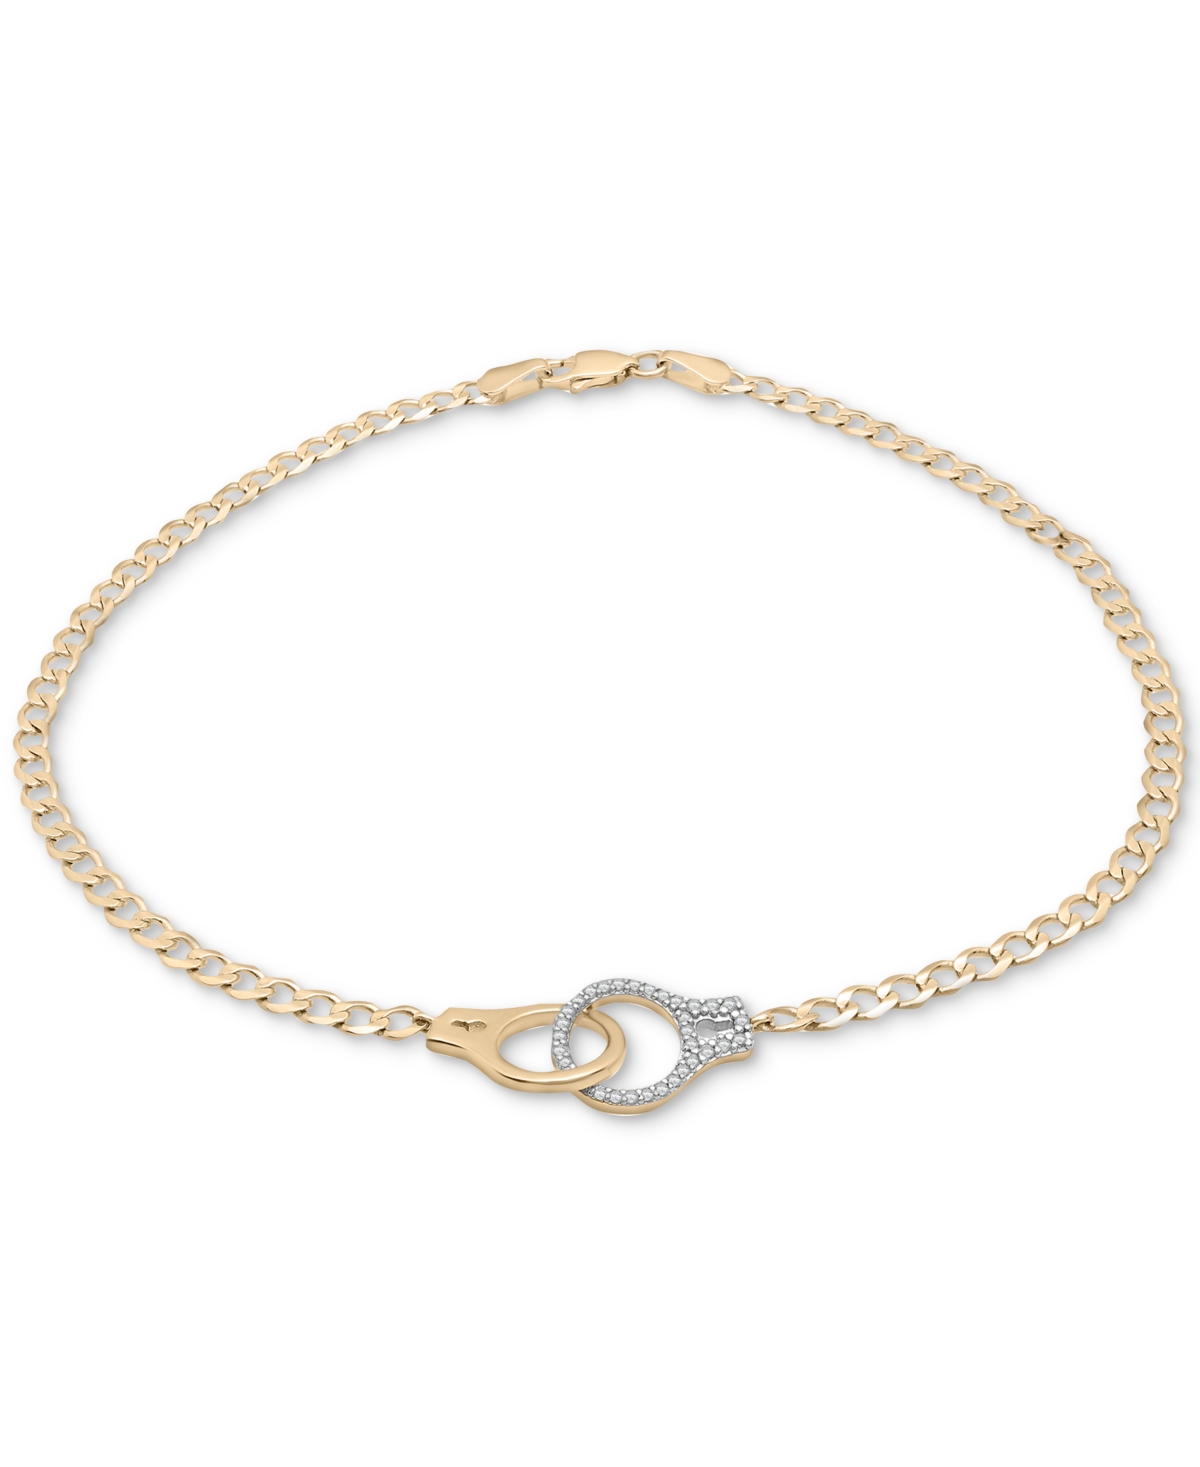 Diamond Handcuff Ankle Bracelet (1/6 ct. t.w.) in 10k Gold, Created for Macy's - K Yellow Gold